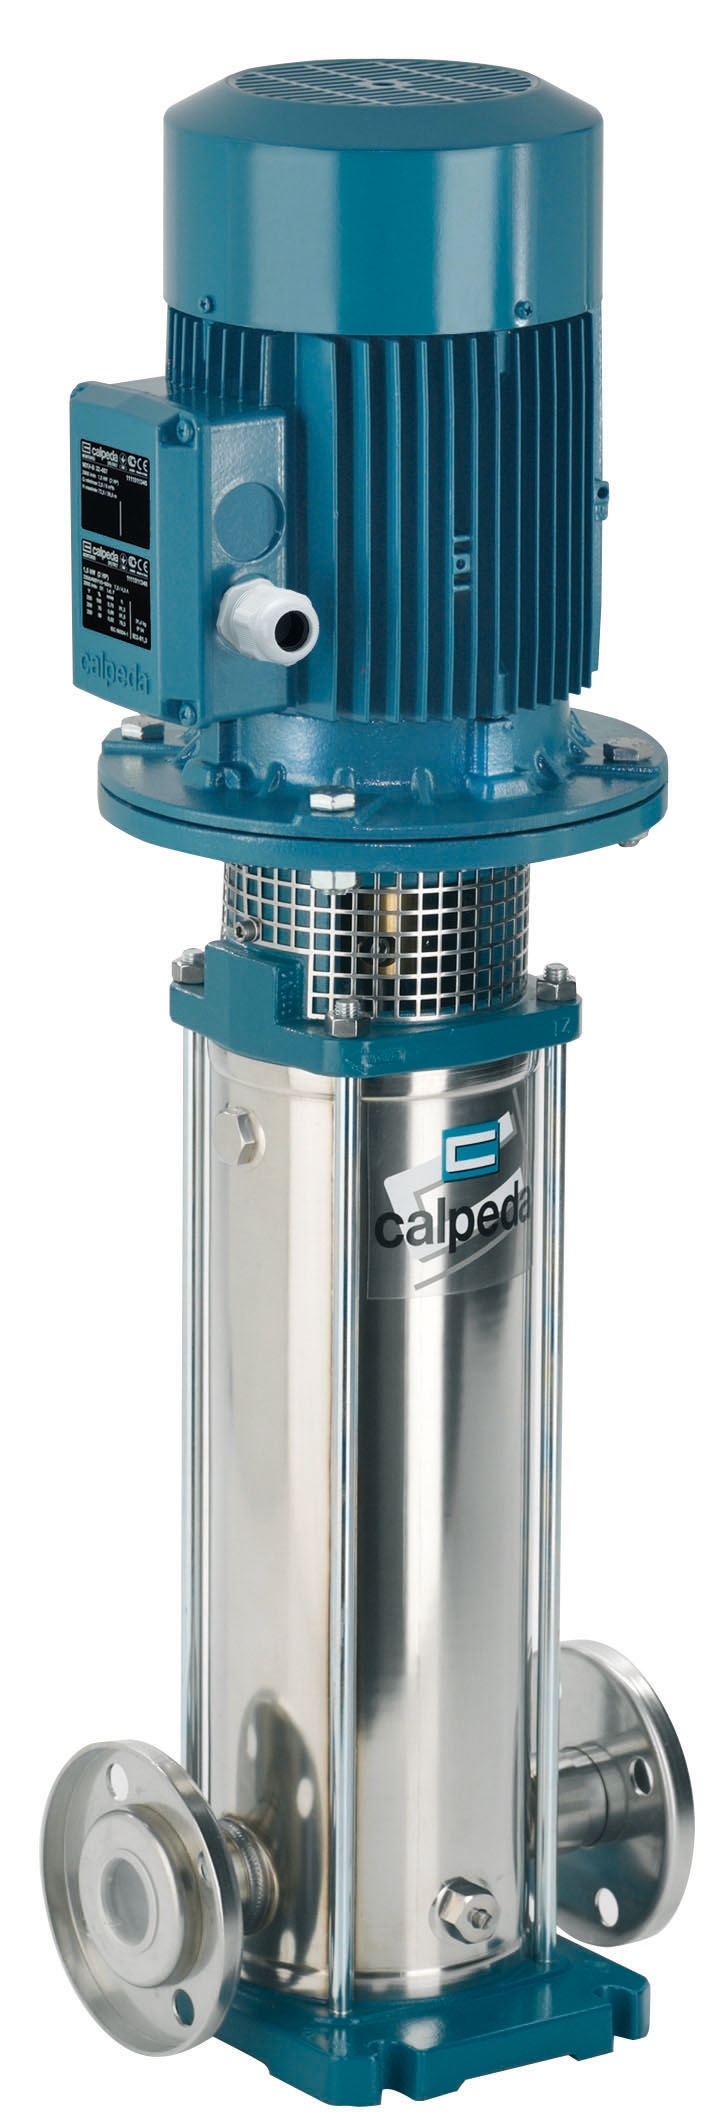 Calpeda MXV Vertical Multistage Pumps (1 Phase)